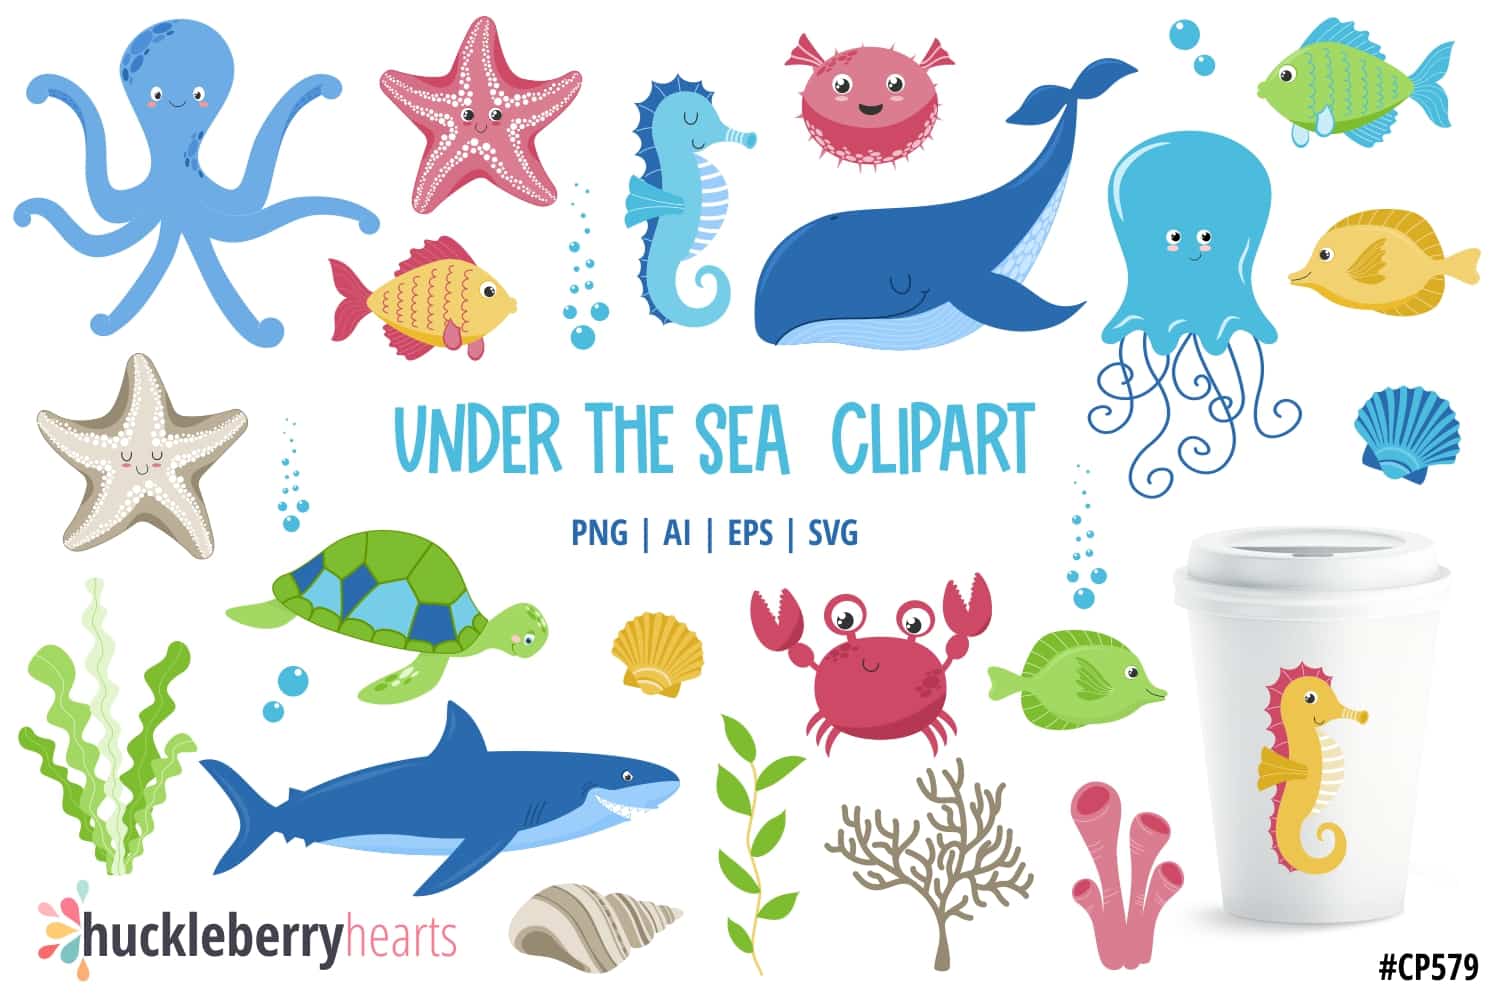 Ocean Creatures Clipart featuring fish, seahorses, starfish, an octupus, whale, share, and more.